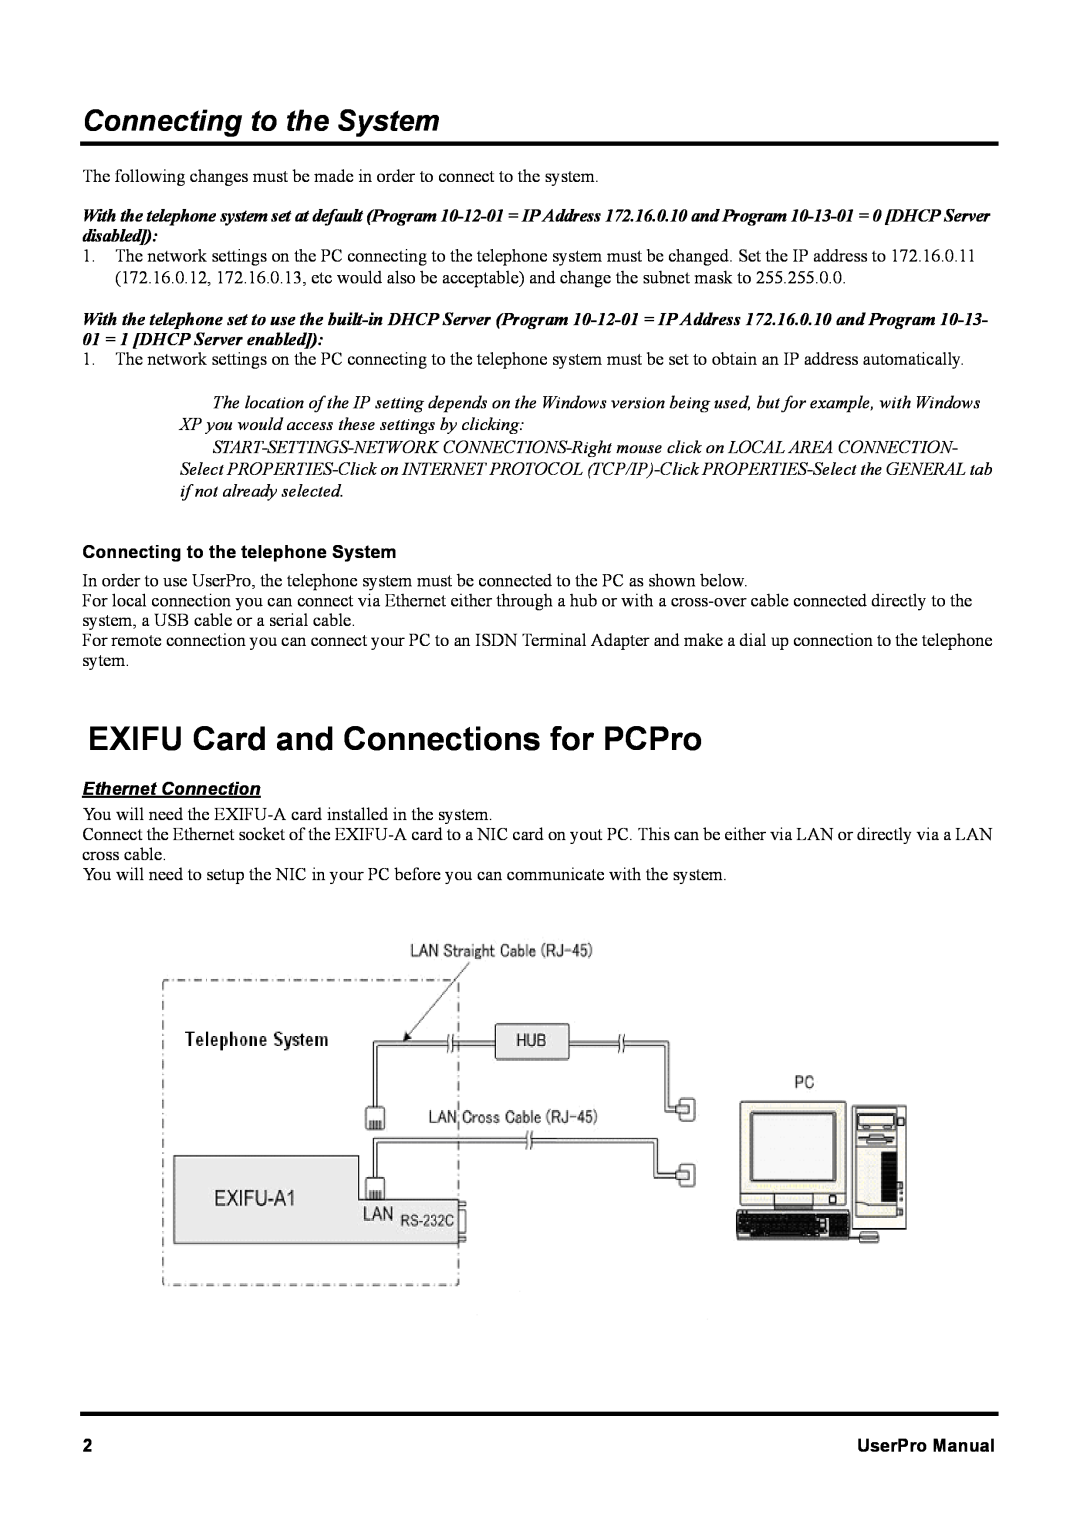 NEC XN120 manual EXIFU Card and Connections for PCPro, Connecting to the System, Connecting to the telephone System 